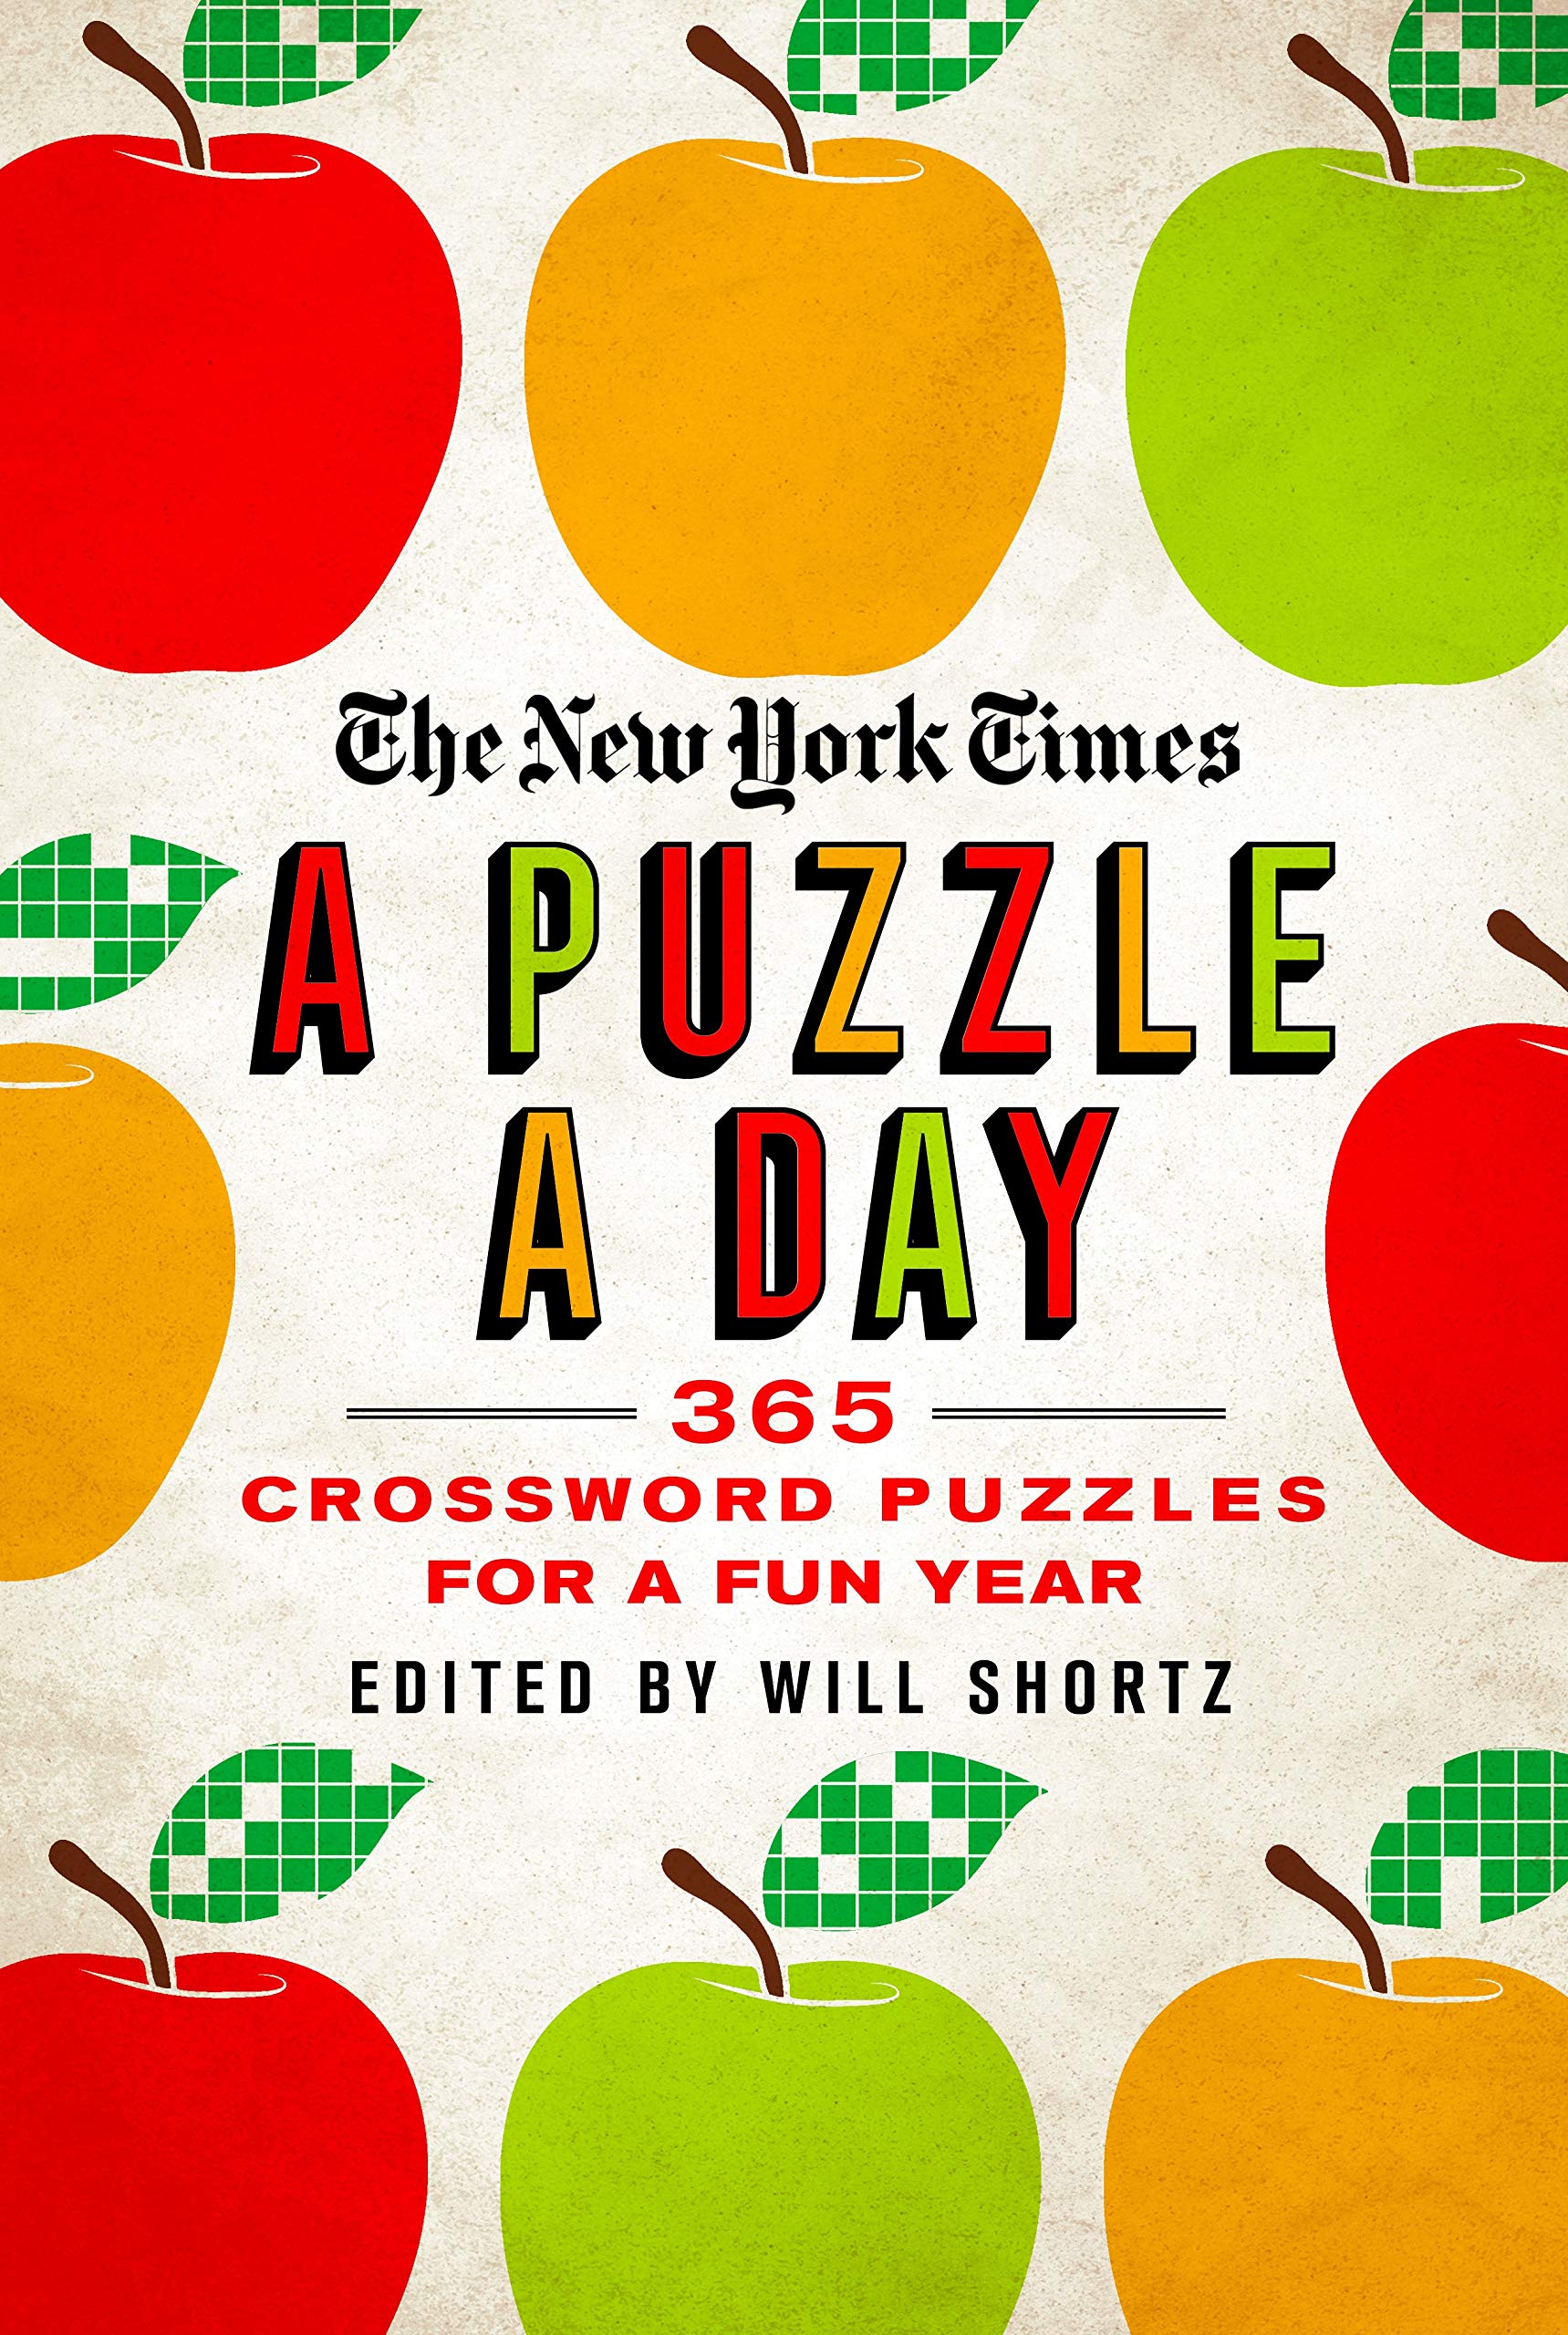 The New York Times a Puzzle a Day: 365 Crossword Puzzles for a Year of Fun by New York Times